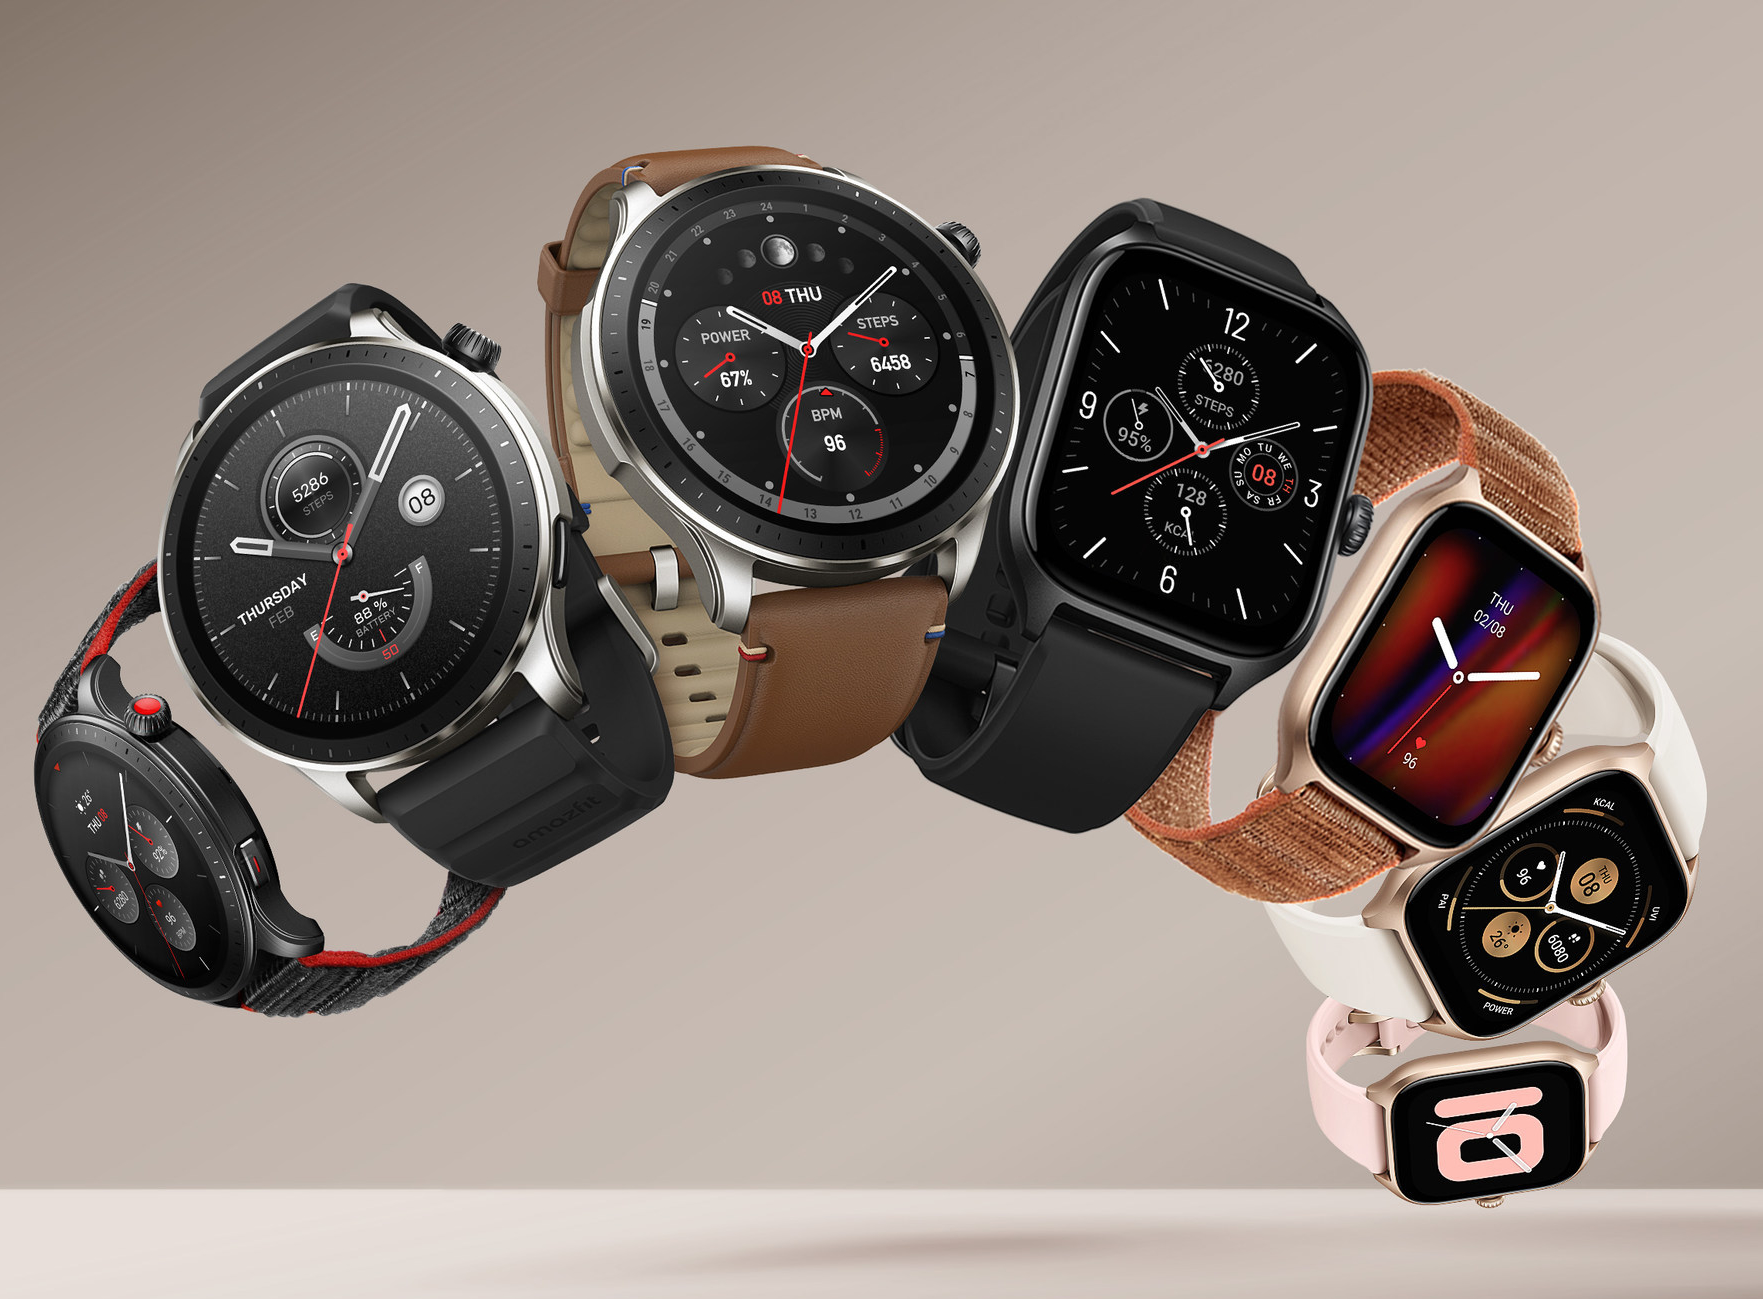 Amazfit GTS 4 Mini vs Huawei Watch GT 2 Pro ECG: What is the difference?